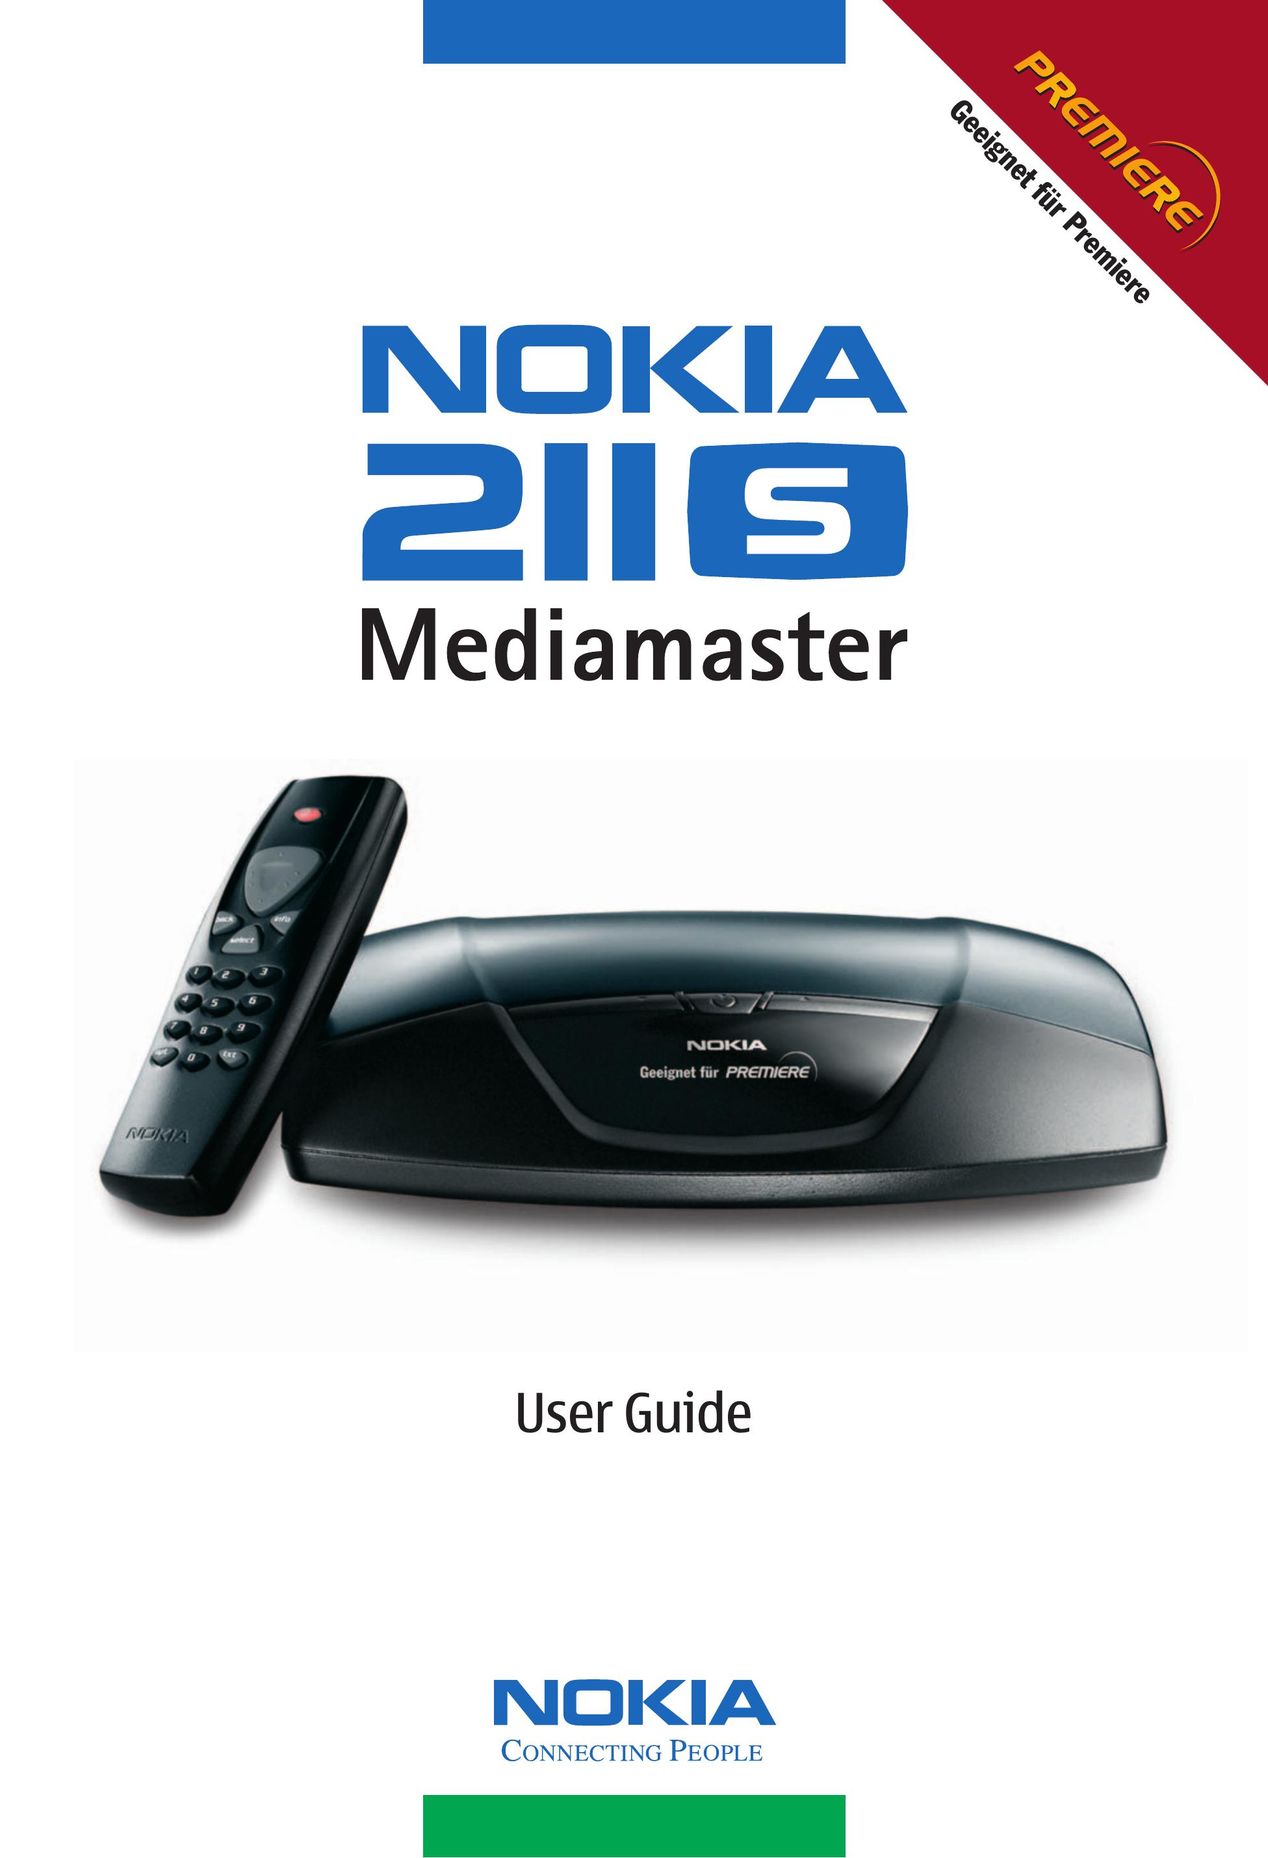 Nokia 211S Cell Phone User Manual